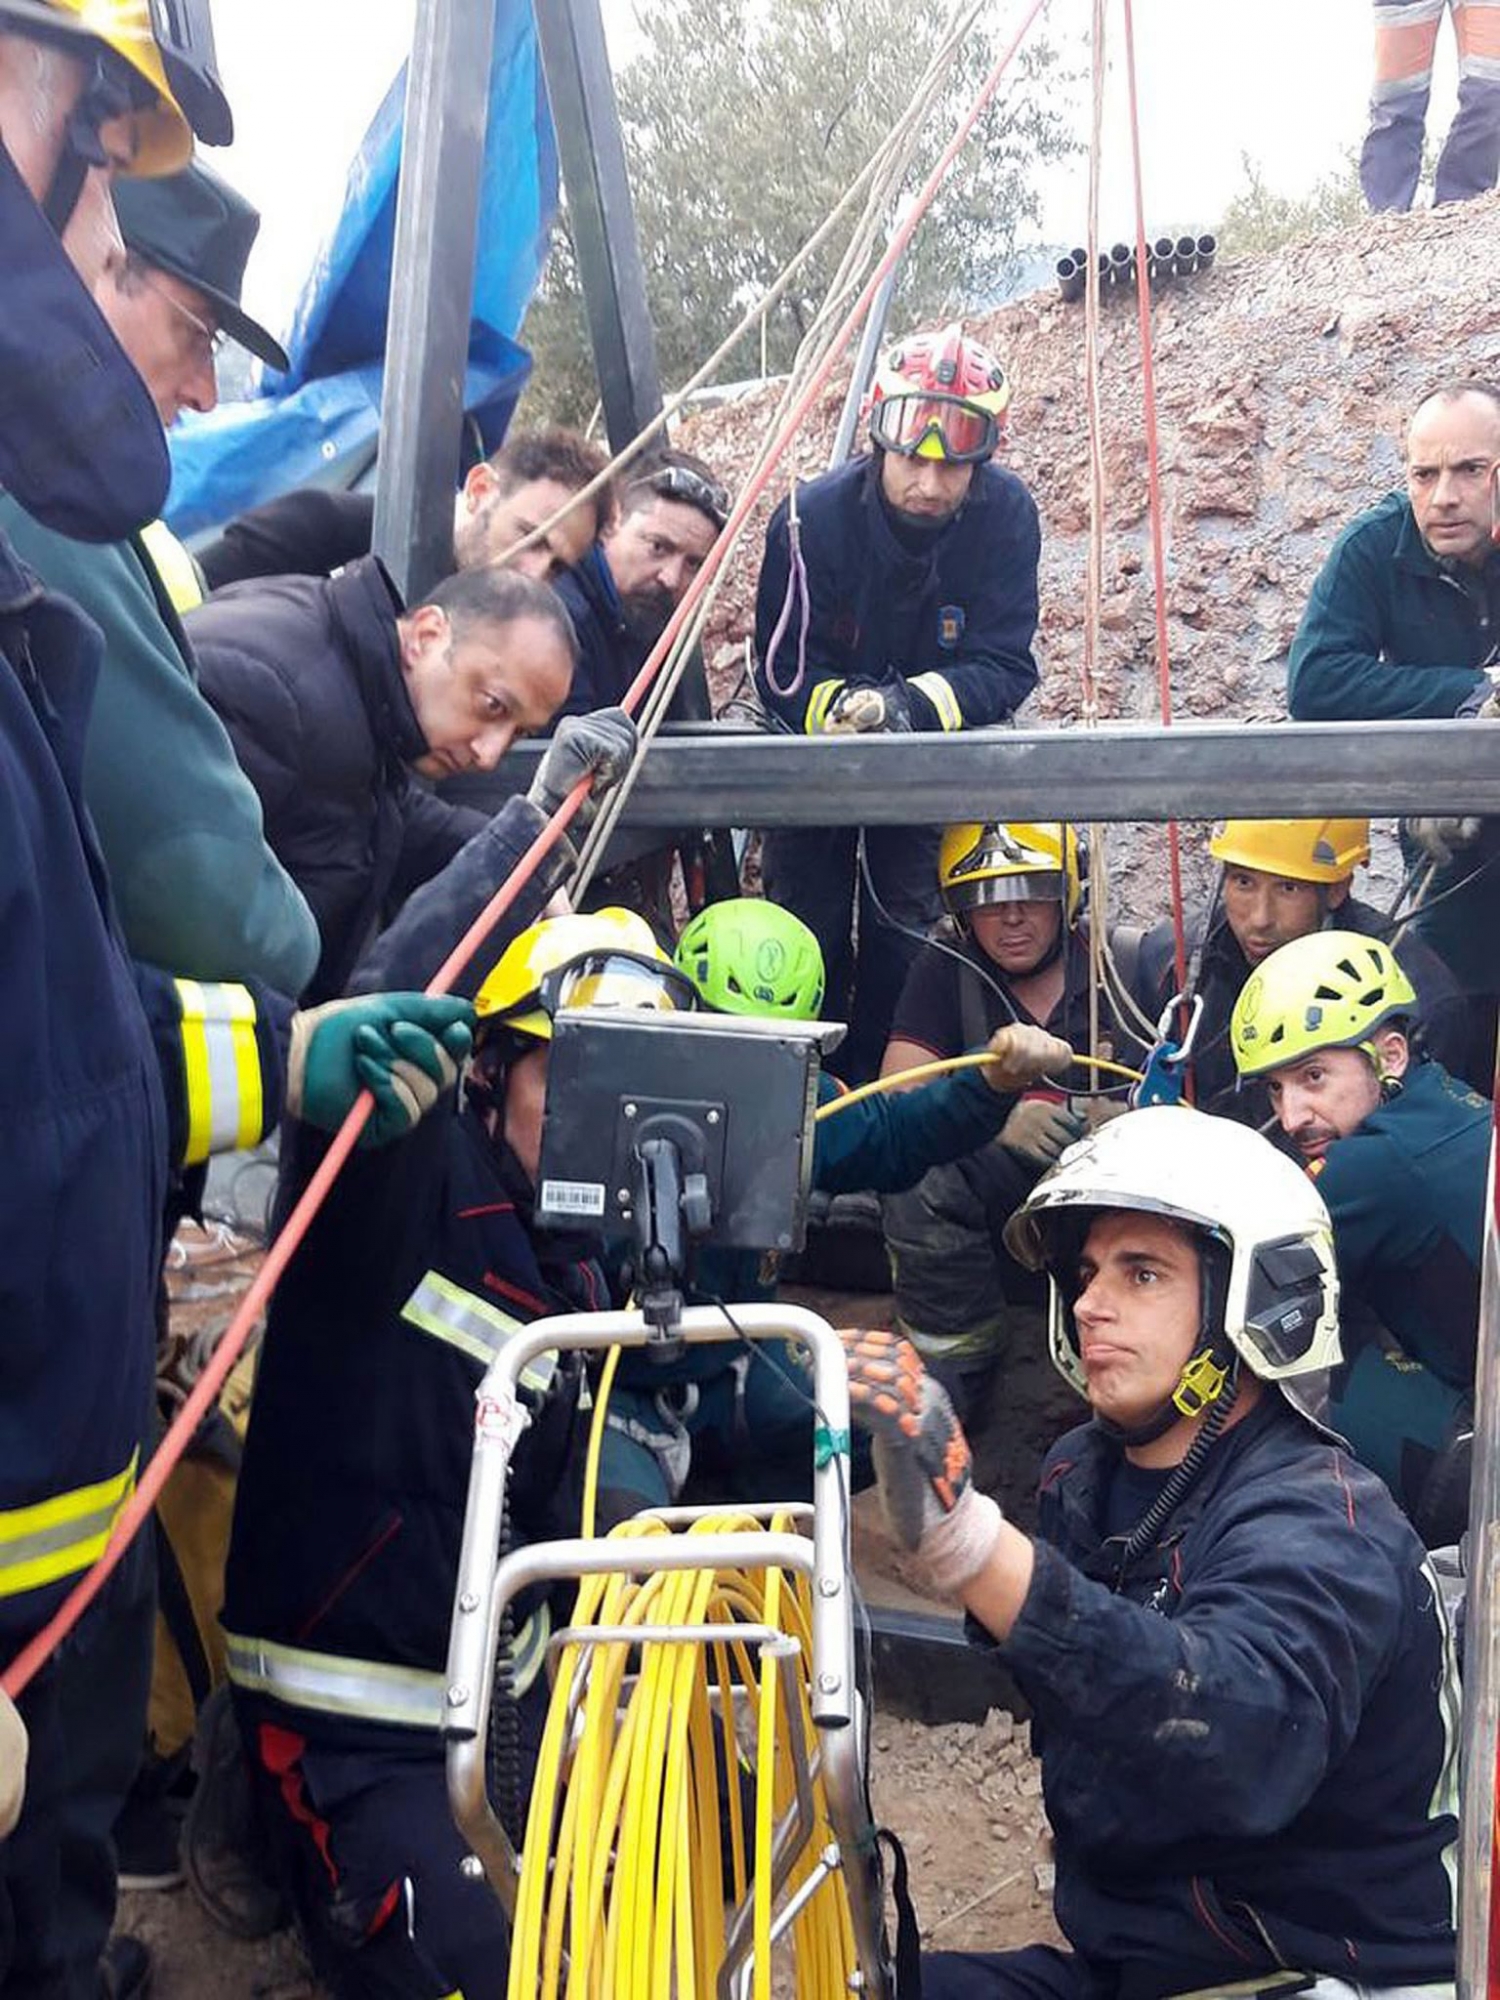 epa07288763 A handout photo made available by the Andalusian Government shows rescue teams working at the borehole where two-year-old boy Julen fell into back on 13 January, in the town of Totalan in Malaga, southeastern Spain, 15 January 2019 (issued 16 January 2019). The rescue experts have decided to open two new holes, a 80-meters-long parallel one and another oblique, to reach the place where Julen is trapped inside the 110-meters-deep well into which he fell. The works are expected to last between 24 and 48 hours.  EPA/ANDALUSIAN GOVERNMENT HANDOUT  HANDOUT EDITORIAL USE ONLY/NO SALES SPAIN ACCIDENTS CHILD FALLS INTO WELL